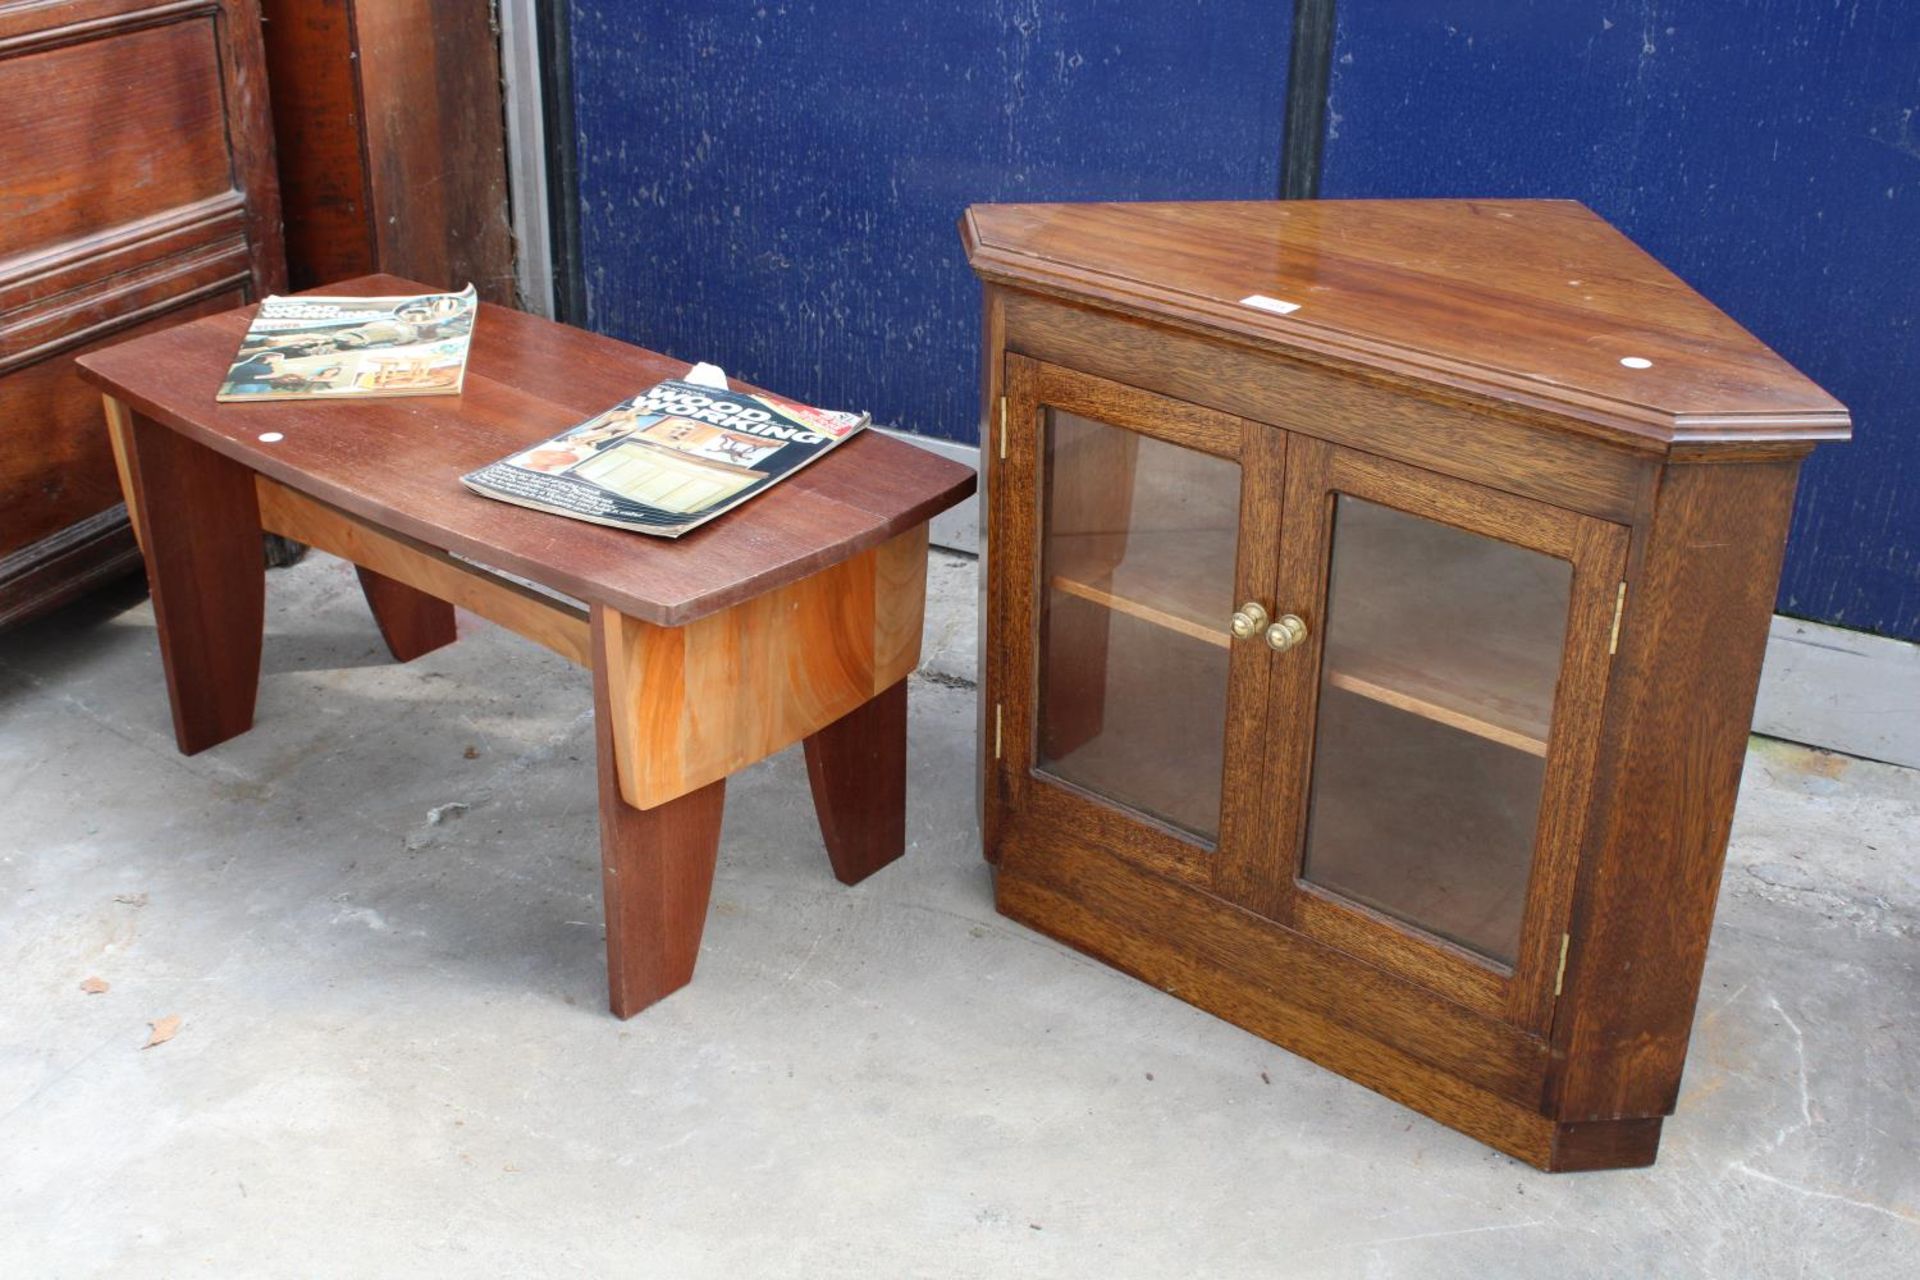 A GORDON WARR CONTRASTING HARDWOOD COFFEE TABLE AND AN OAK CORNER CABINET